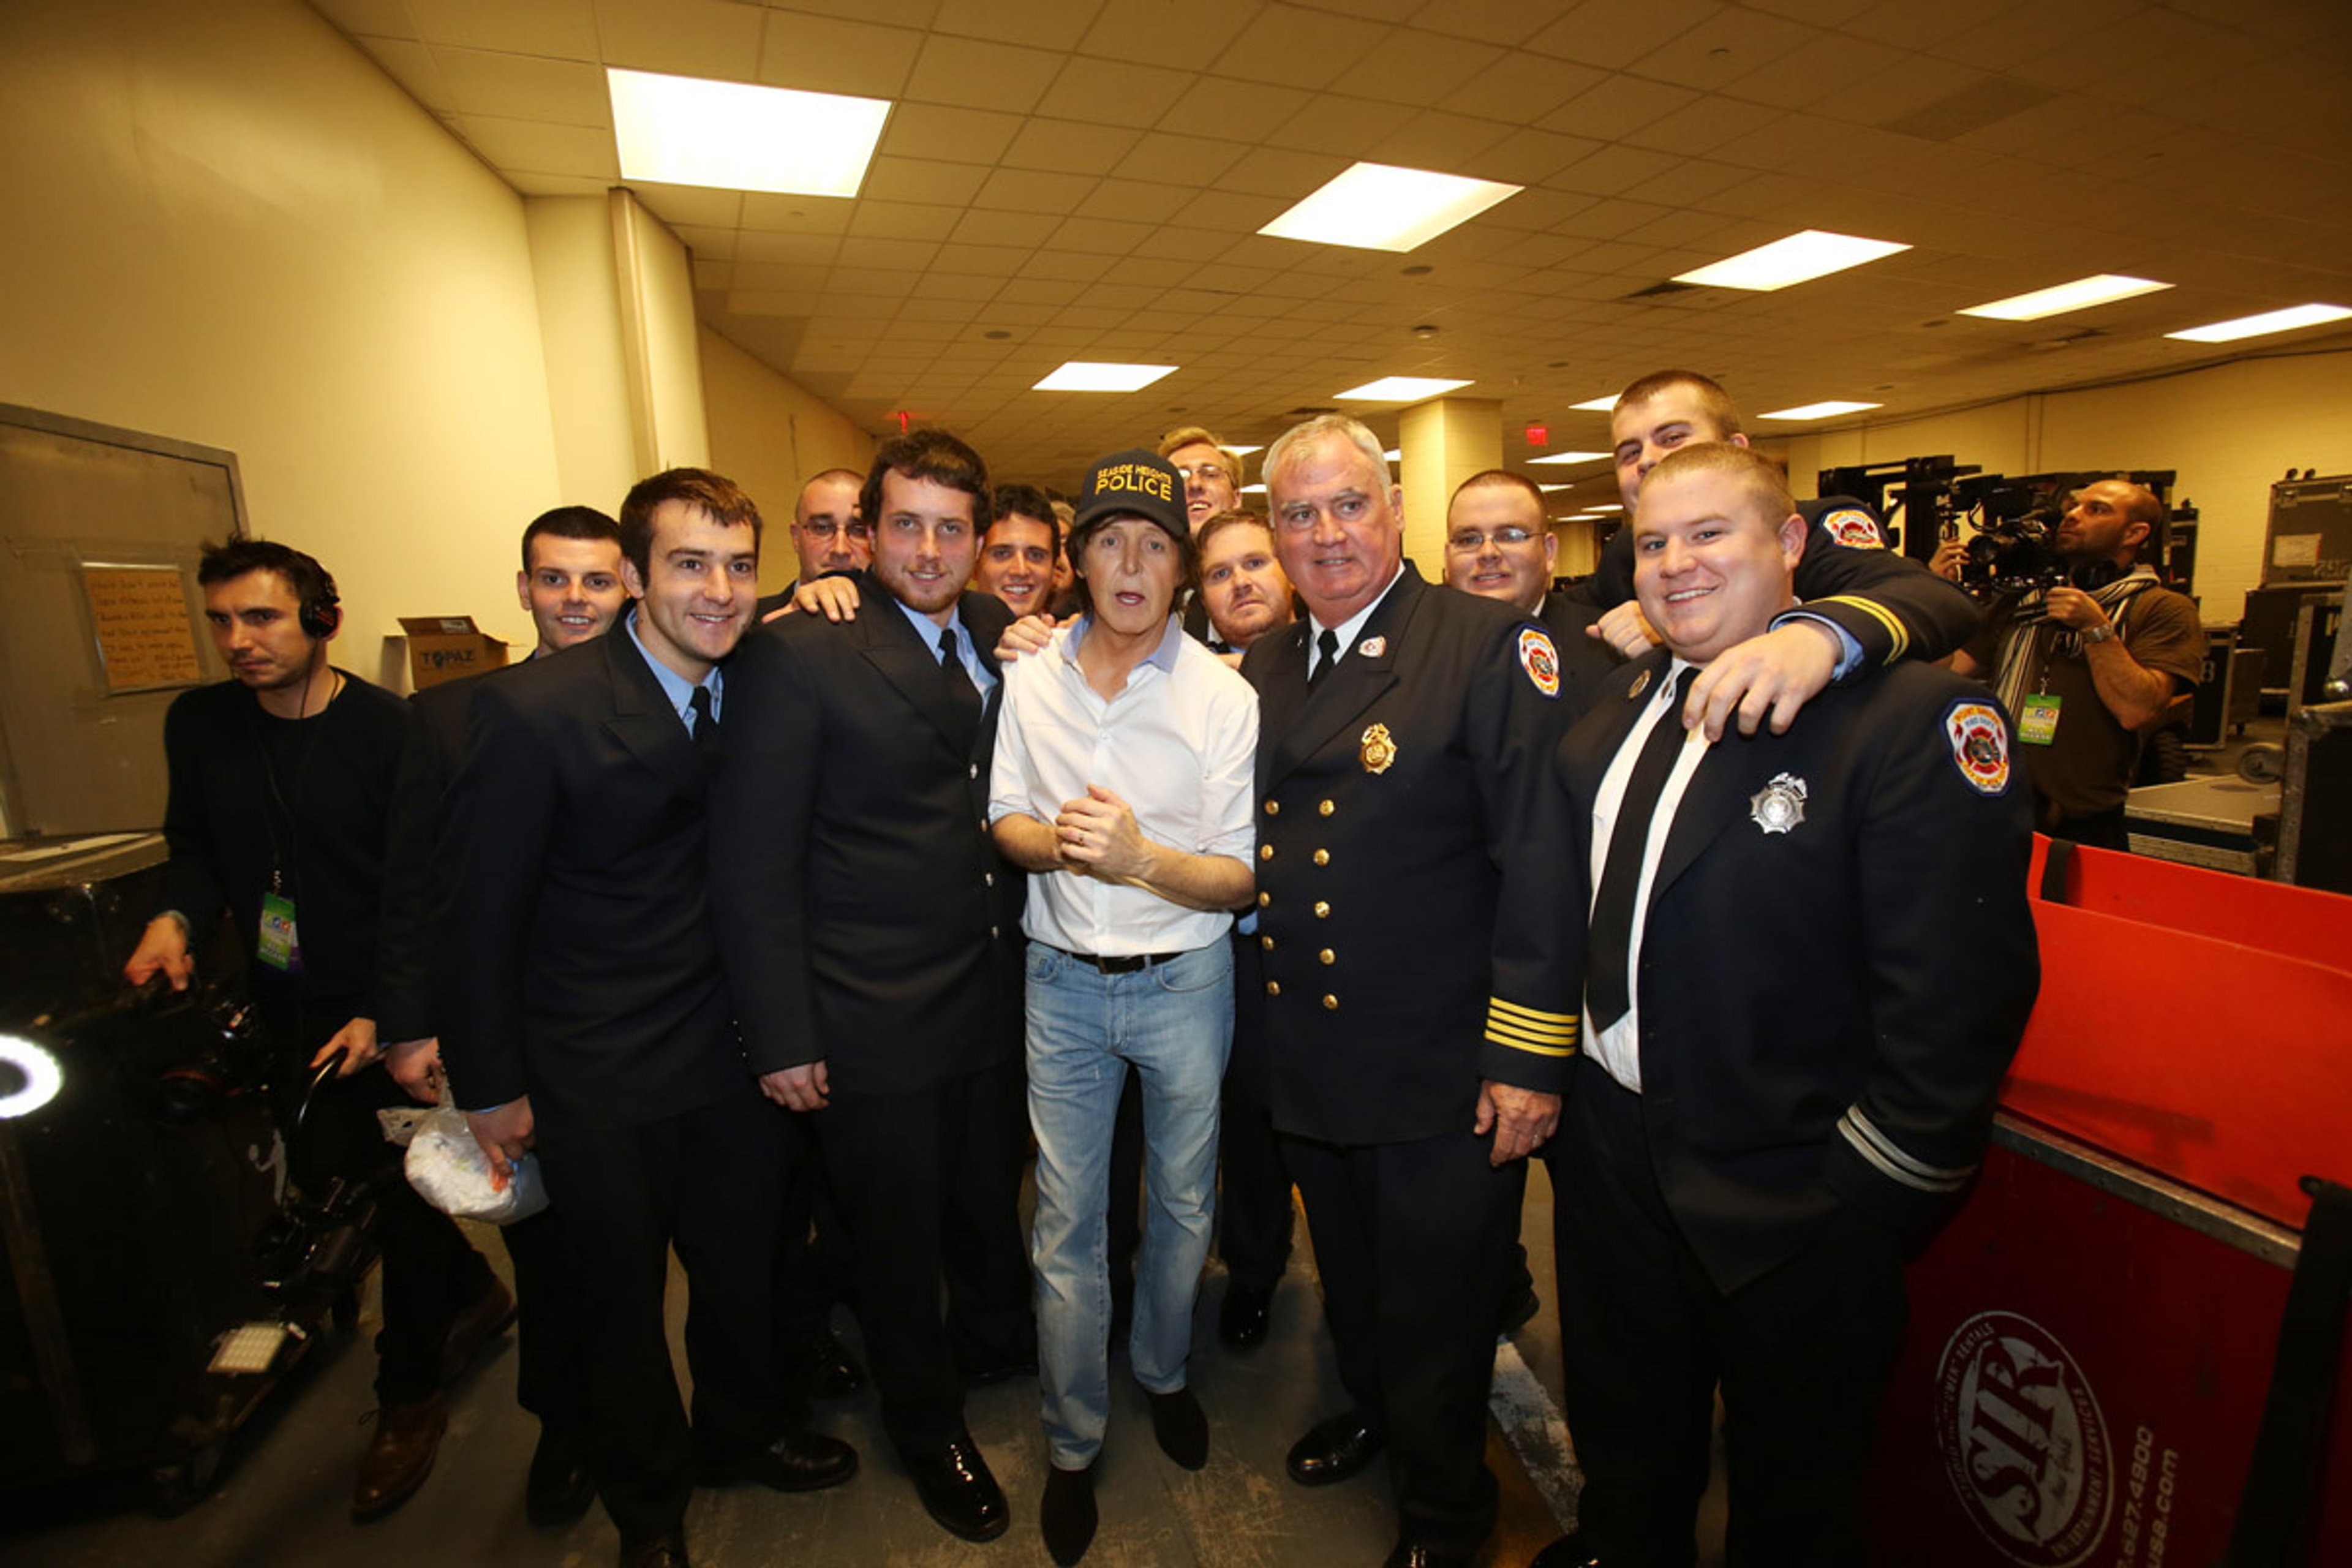 Paul backstage with the Seaside Heights Police Force, 12-12-12 Hurricane Sandy Benefit, Madison Square Garden, NYC, 12th December 2012